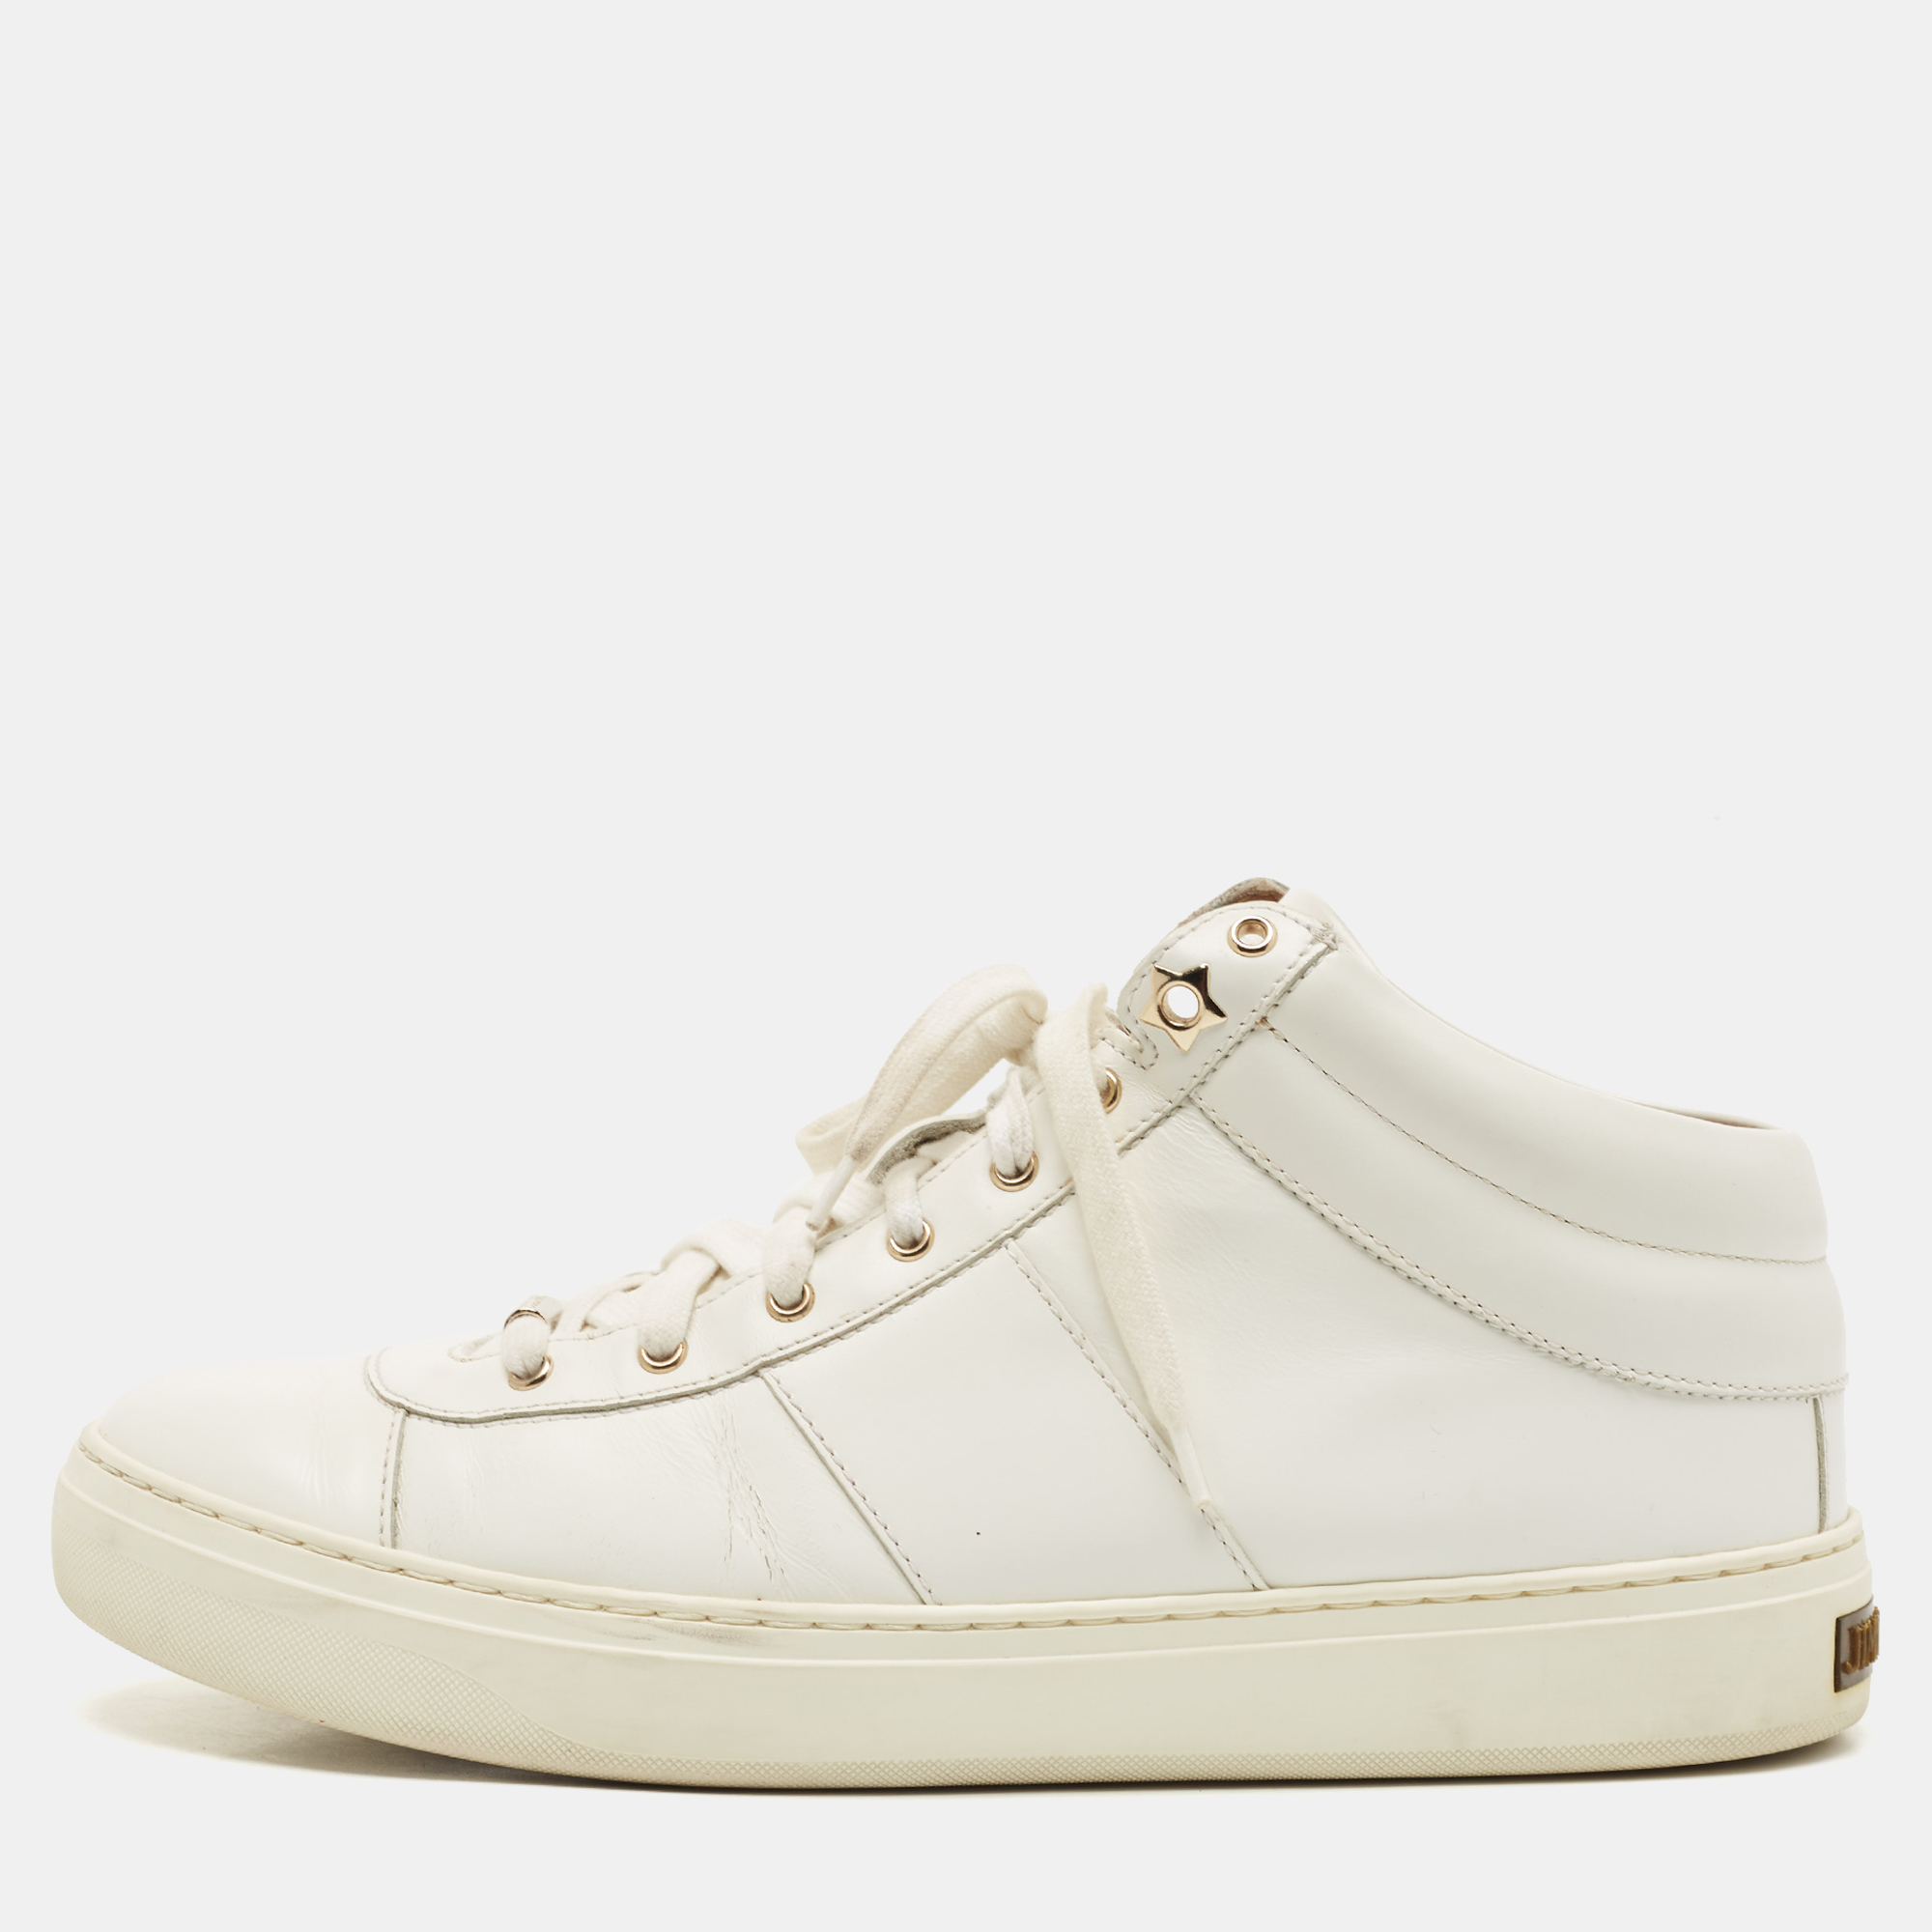 Jimmy Choo White Leather  High Top Sneakers Size 40